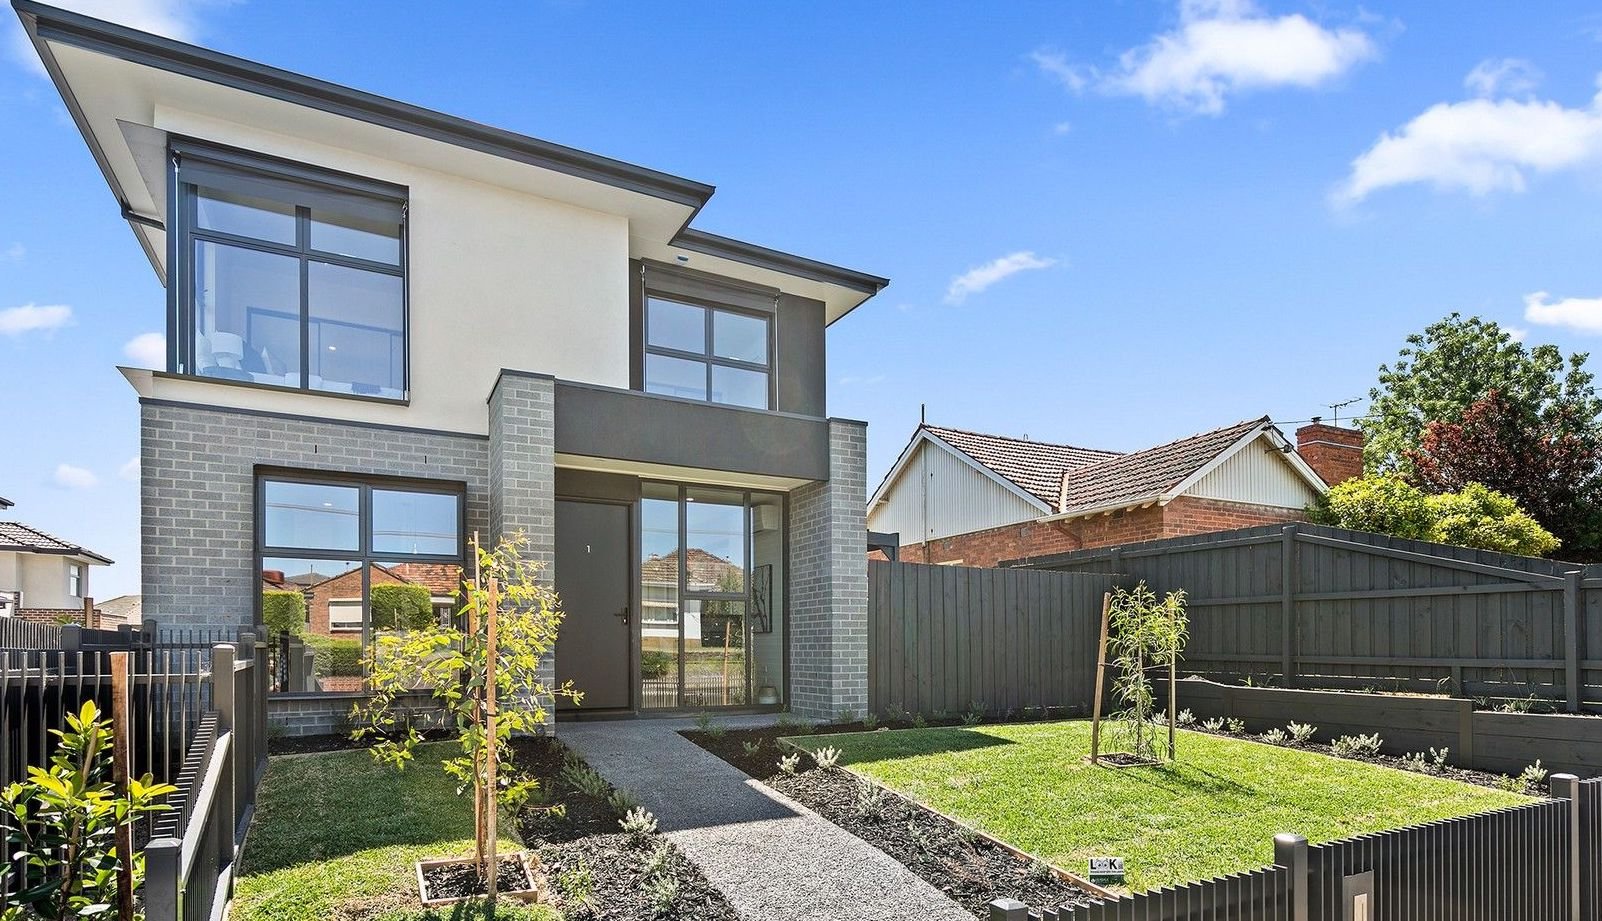 Pascoe Vale South - 9 Reynolds Parade, Pascoe Vale South, VIC 3044 - Townly - 10.jpeg